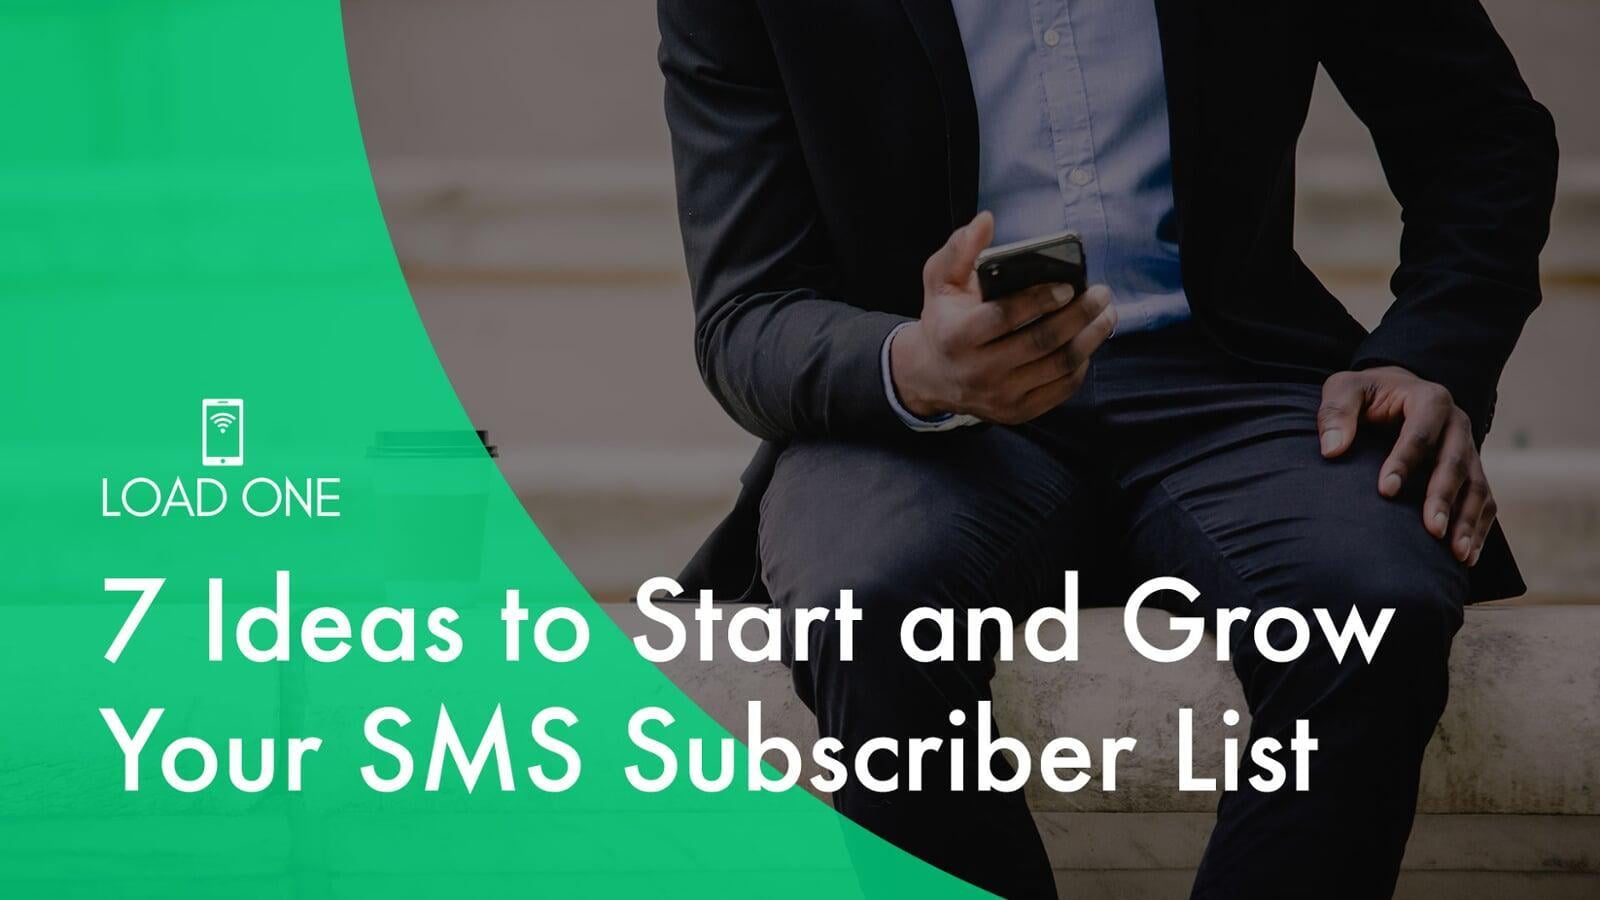 7 Ideas to Start and Grow Your SMS Subscriber List